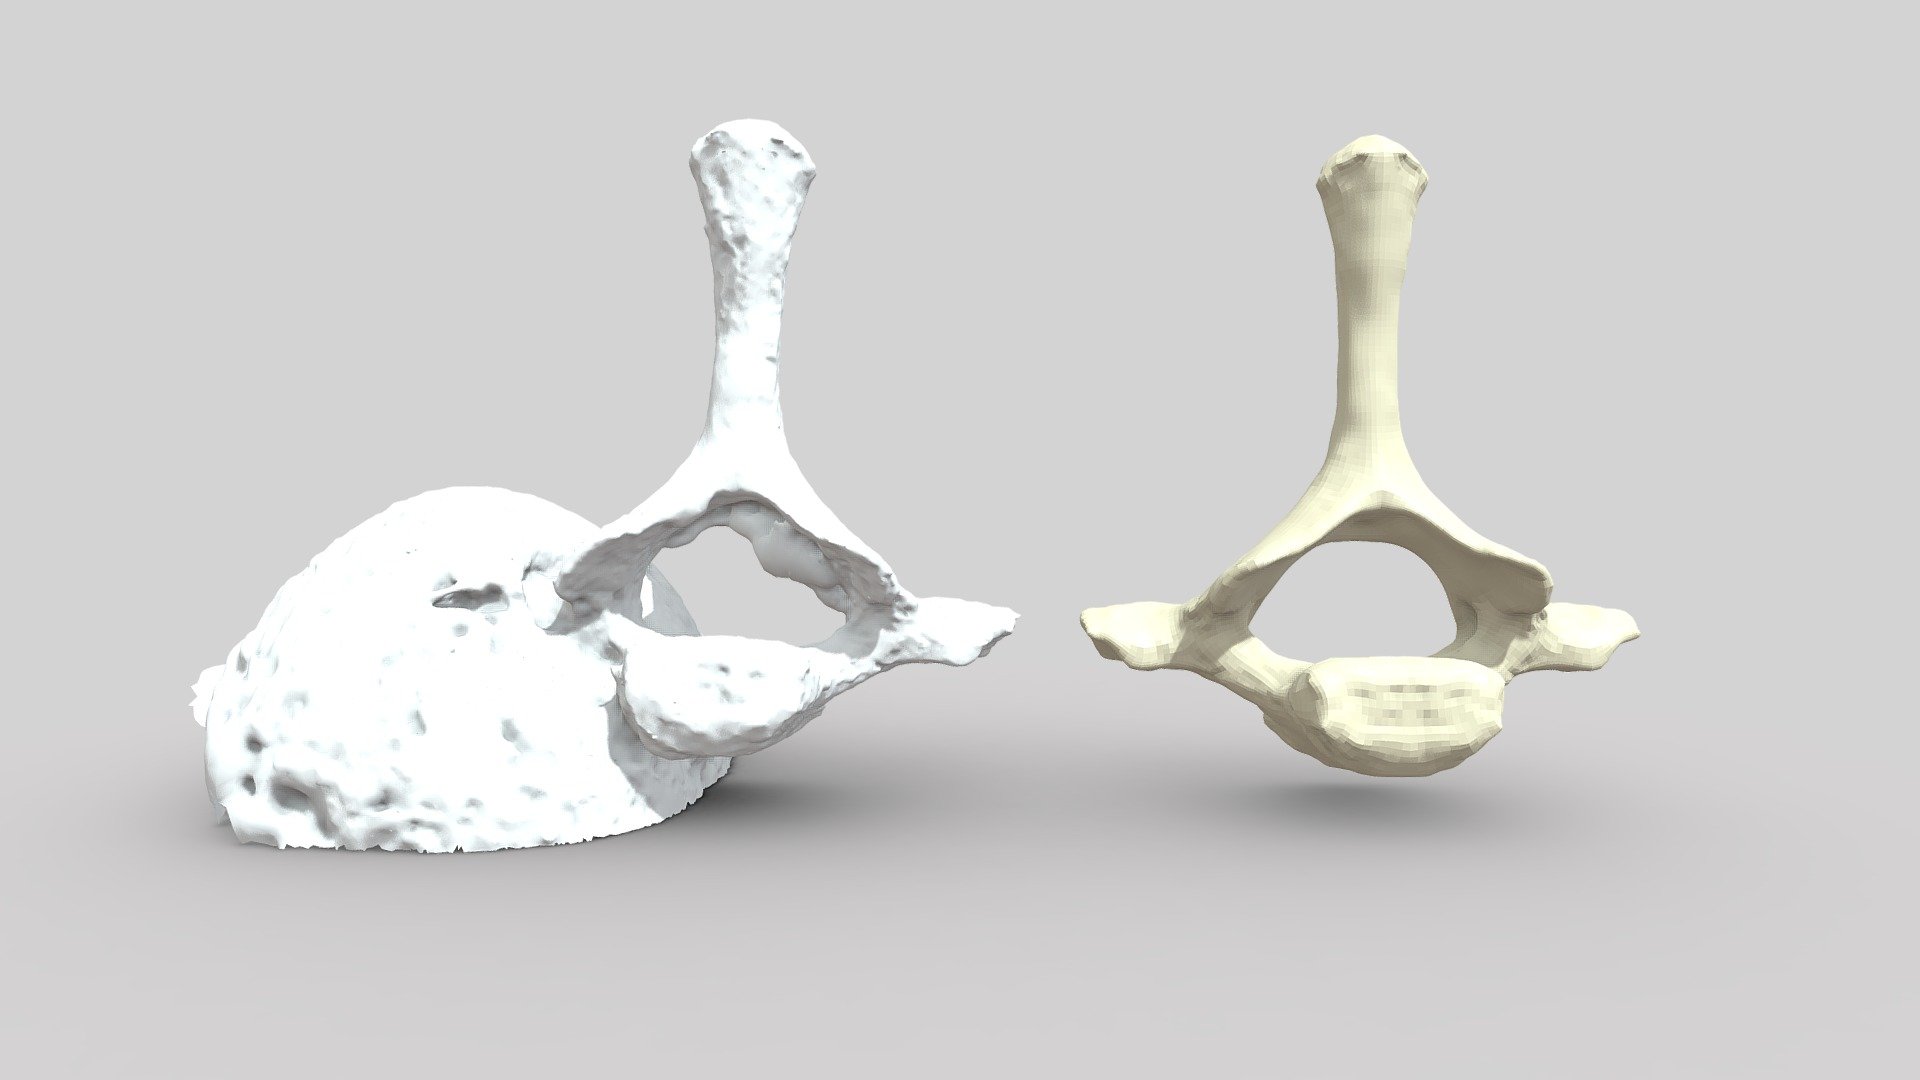 Here the T2, the second thoracic vertebra of Rattus norvegicus. I'm getting better at the photogrammetry scans! The raw model compared to a high poly remesh 3d model